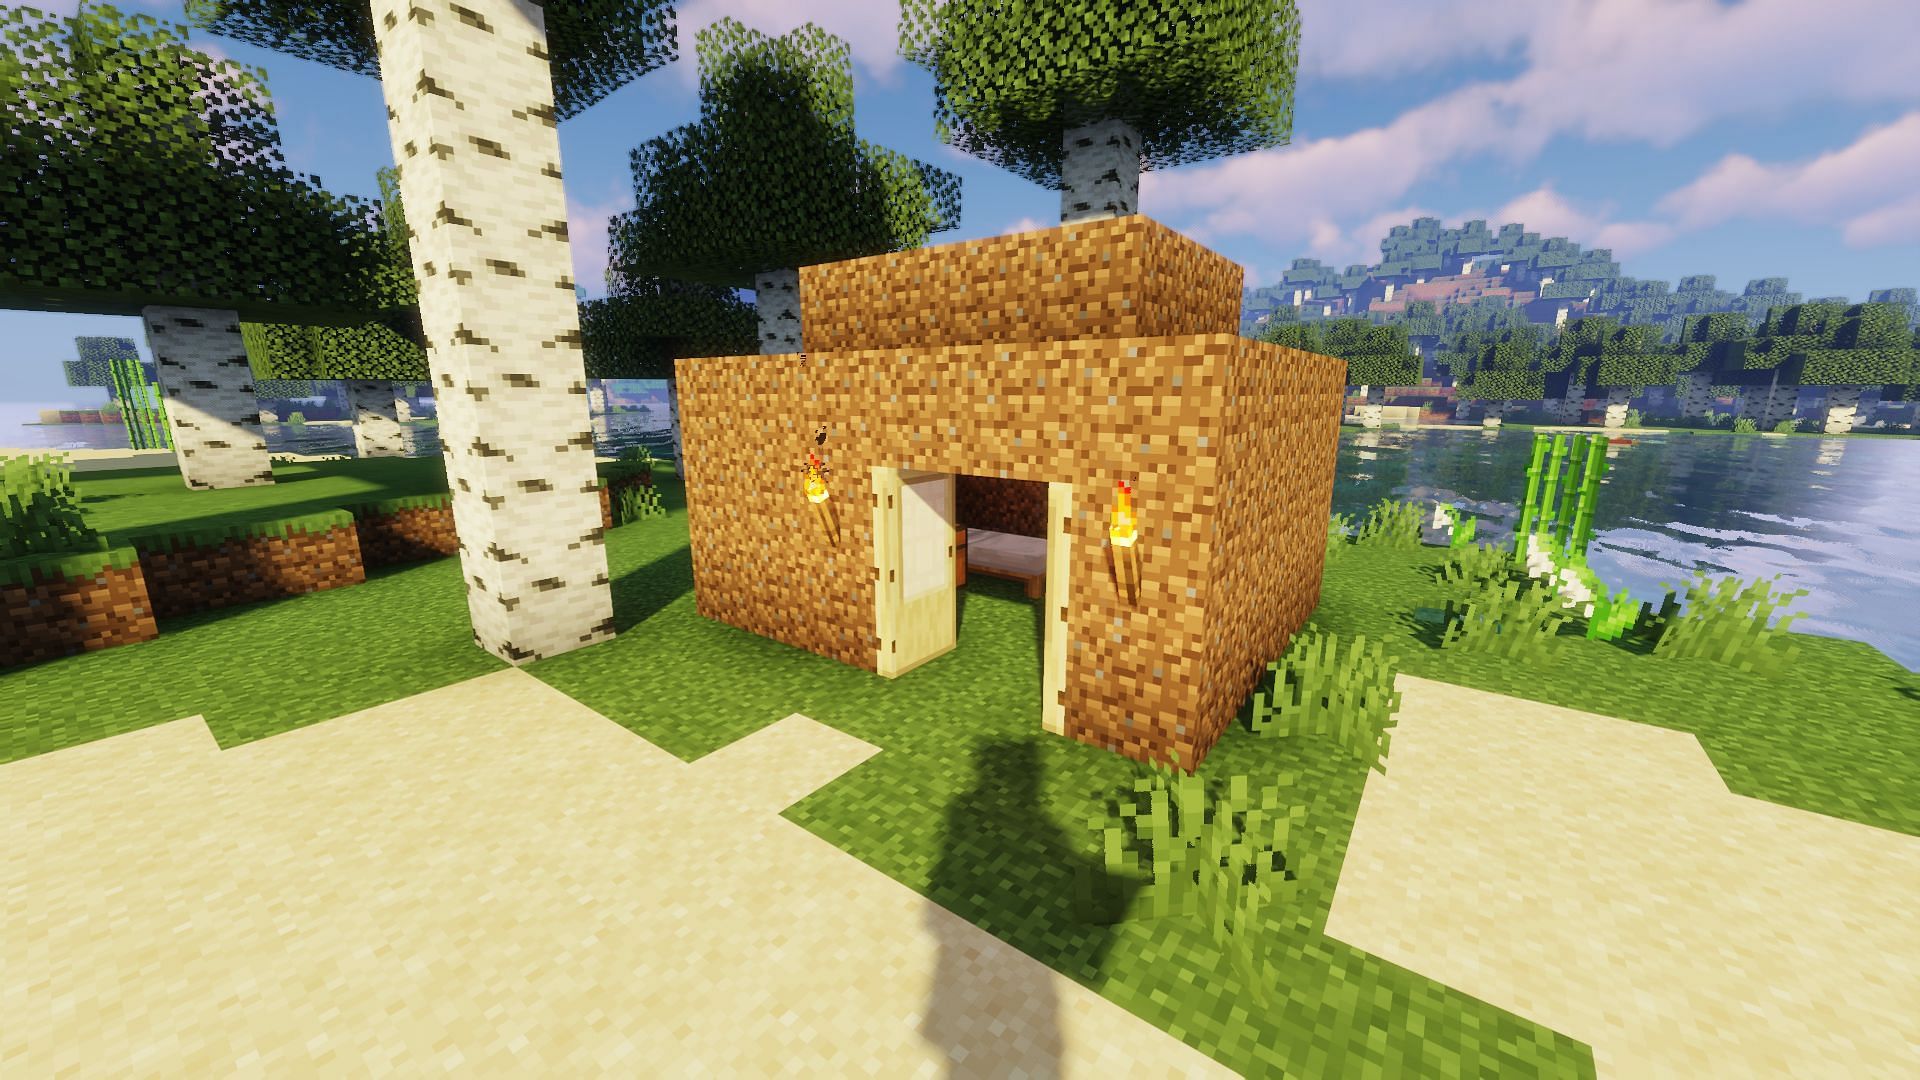 A simple mud hut that players could build on their first day (Image via Minecraft)